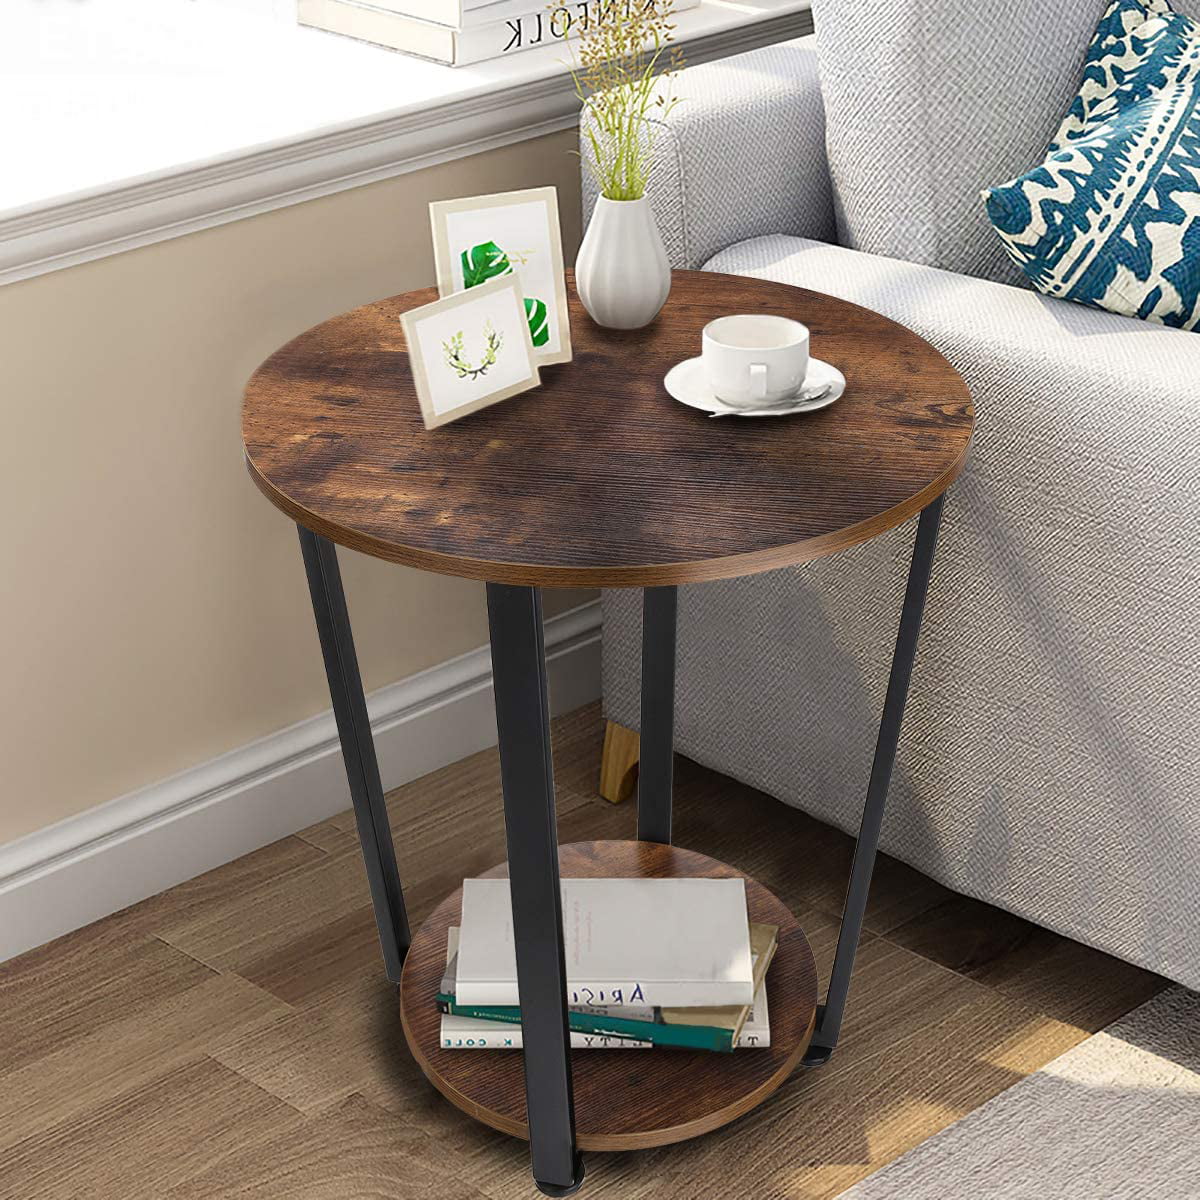 Round End Tables For Bedroom ~ Round End Tables Landmark Table ...